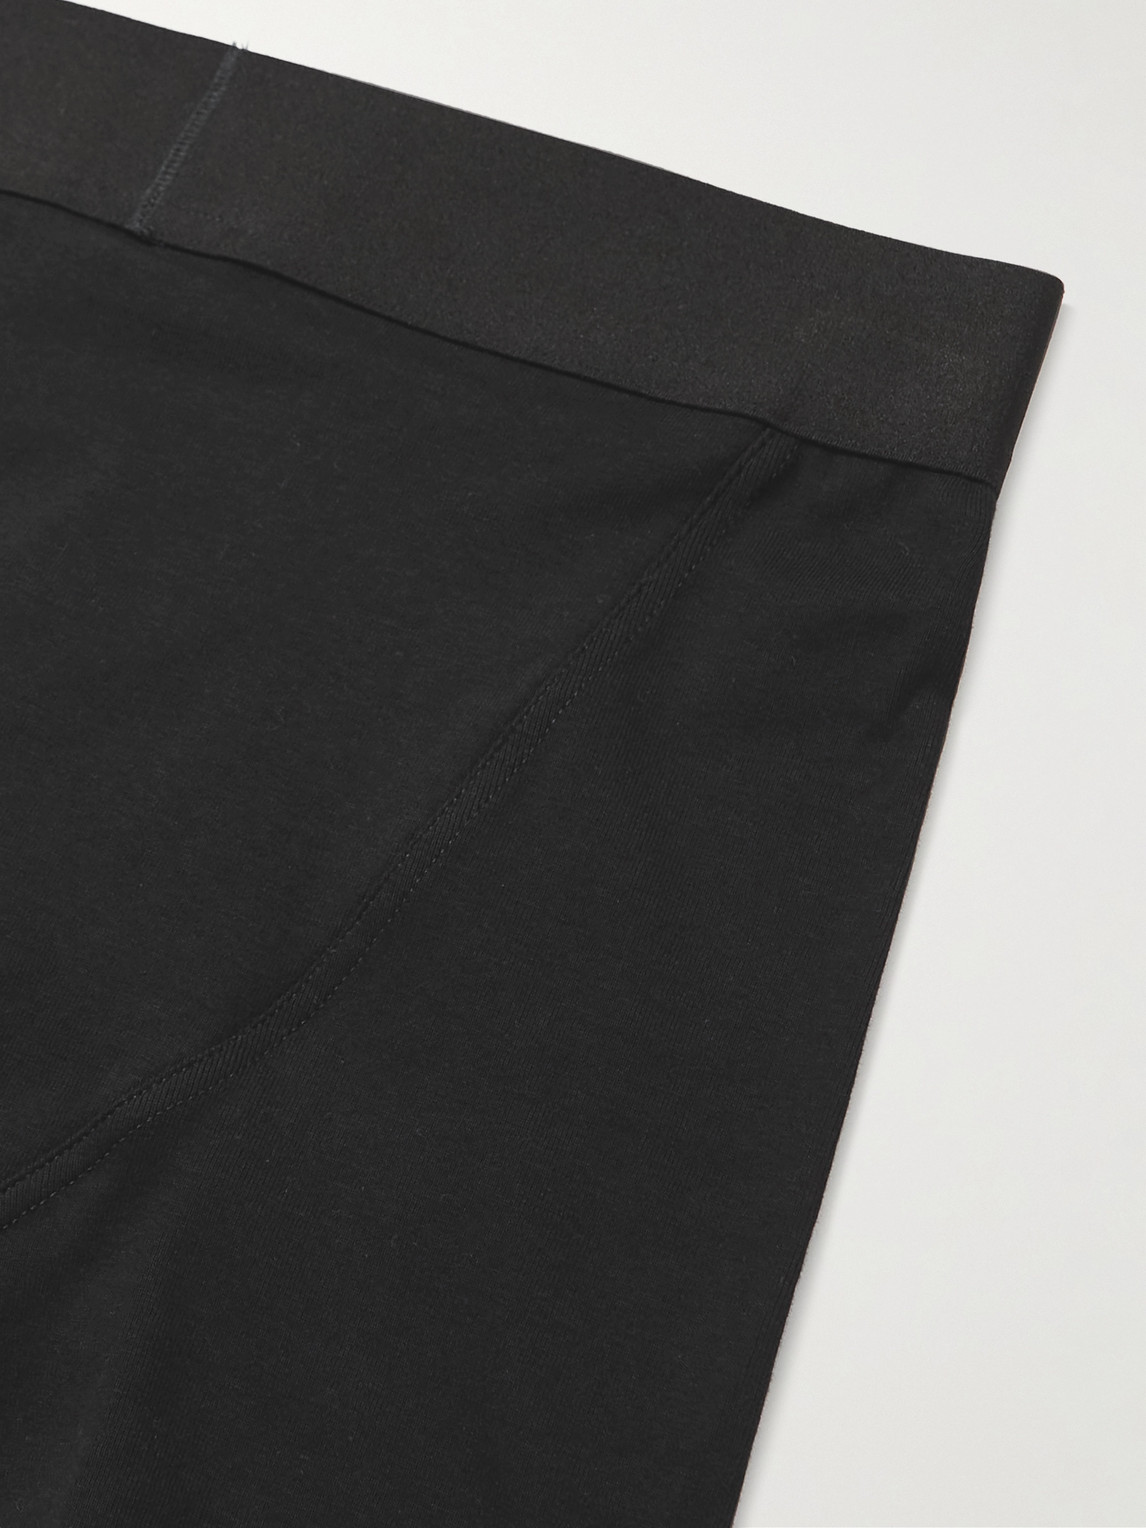 Shop Fear Of God Two-pack Stretch-cotton Jersey Boxer Briefs In Black